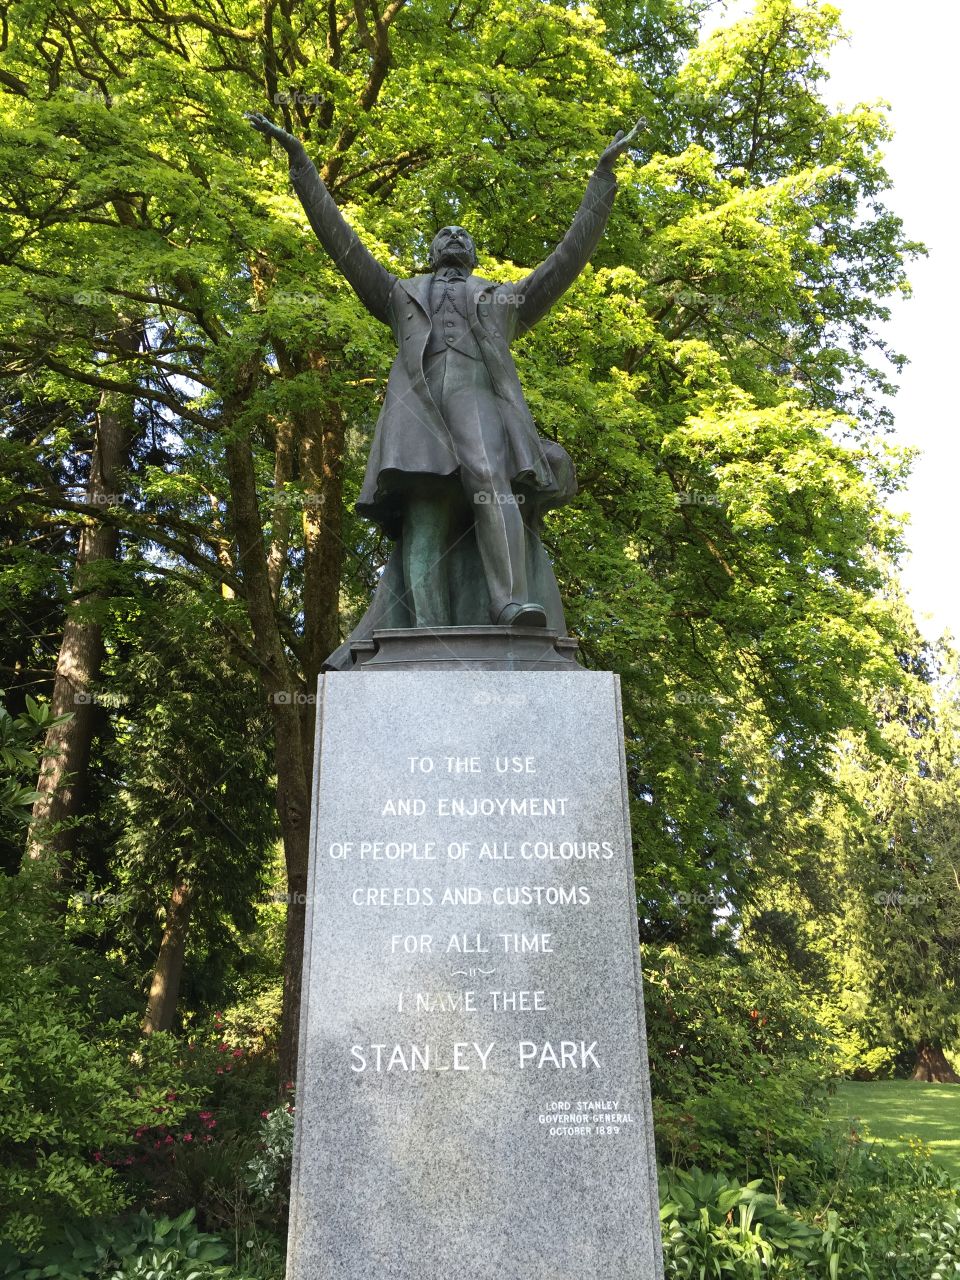 Governor General Lord Stanley at Stanley Park. Statue of Governor General Lord Stanley at Stanley Park, Vancouver, BC